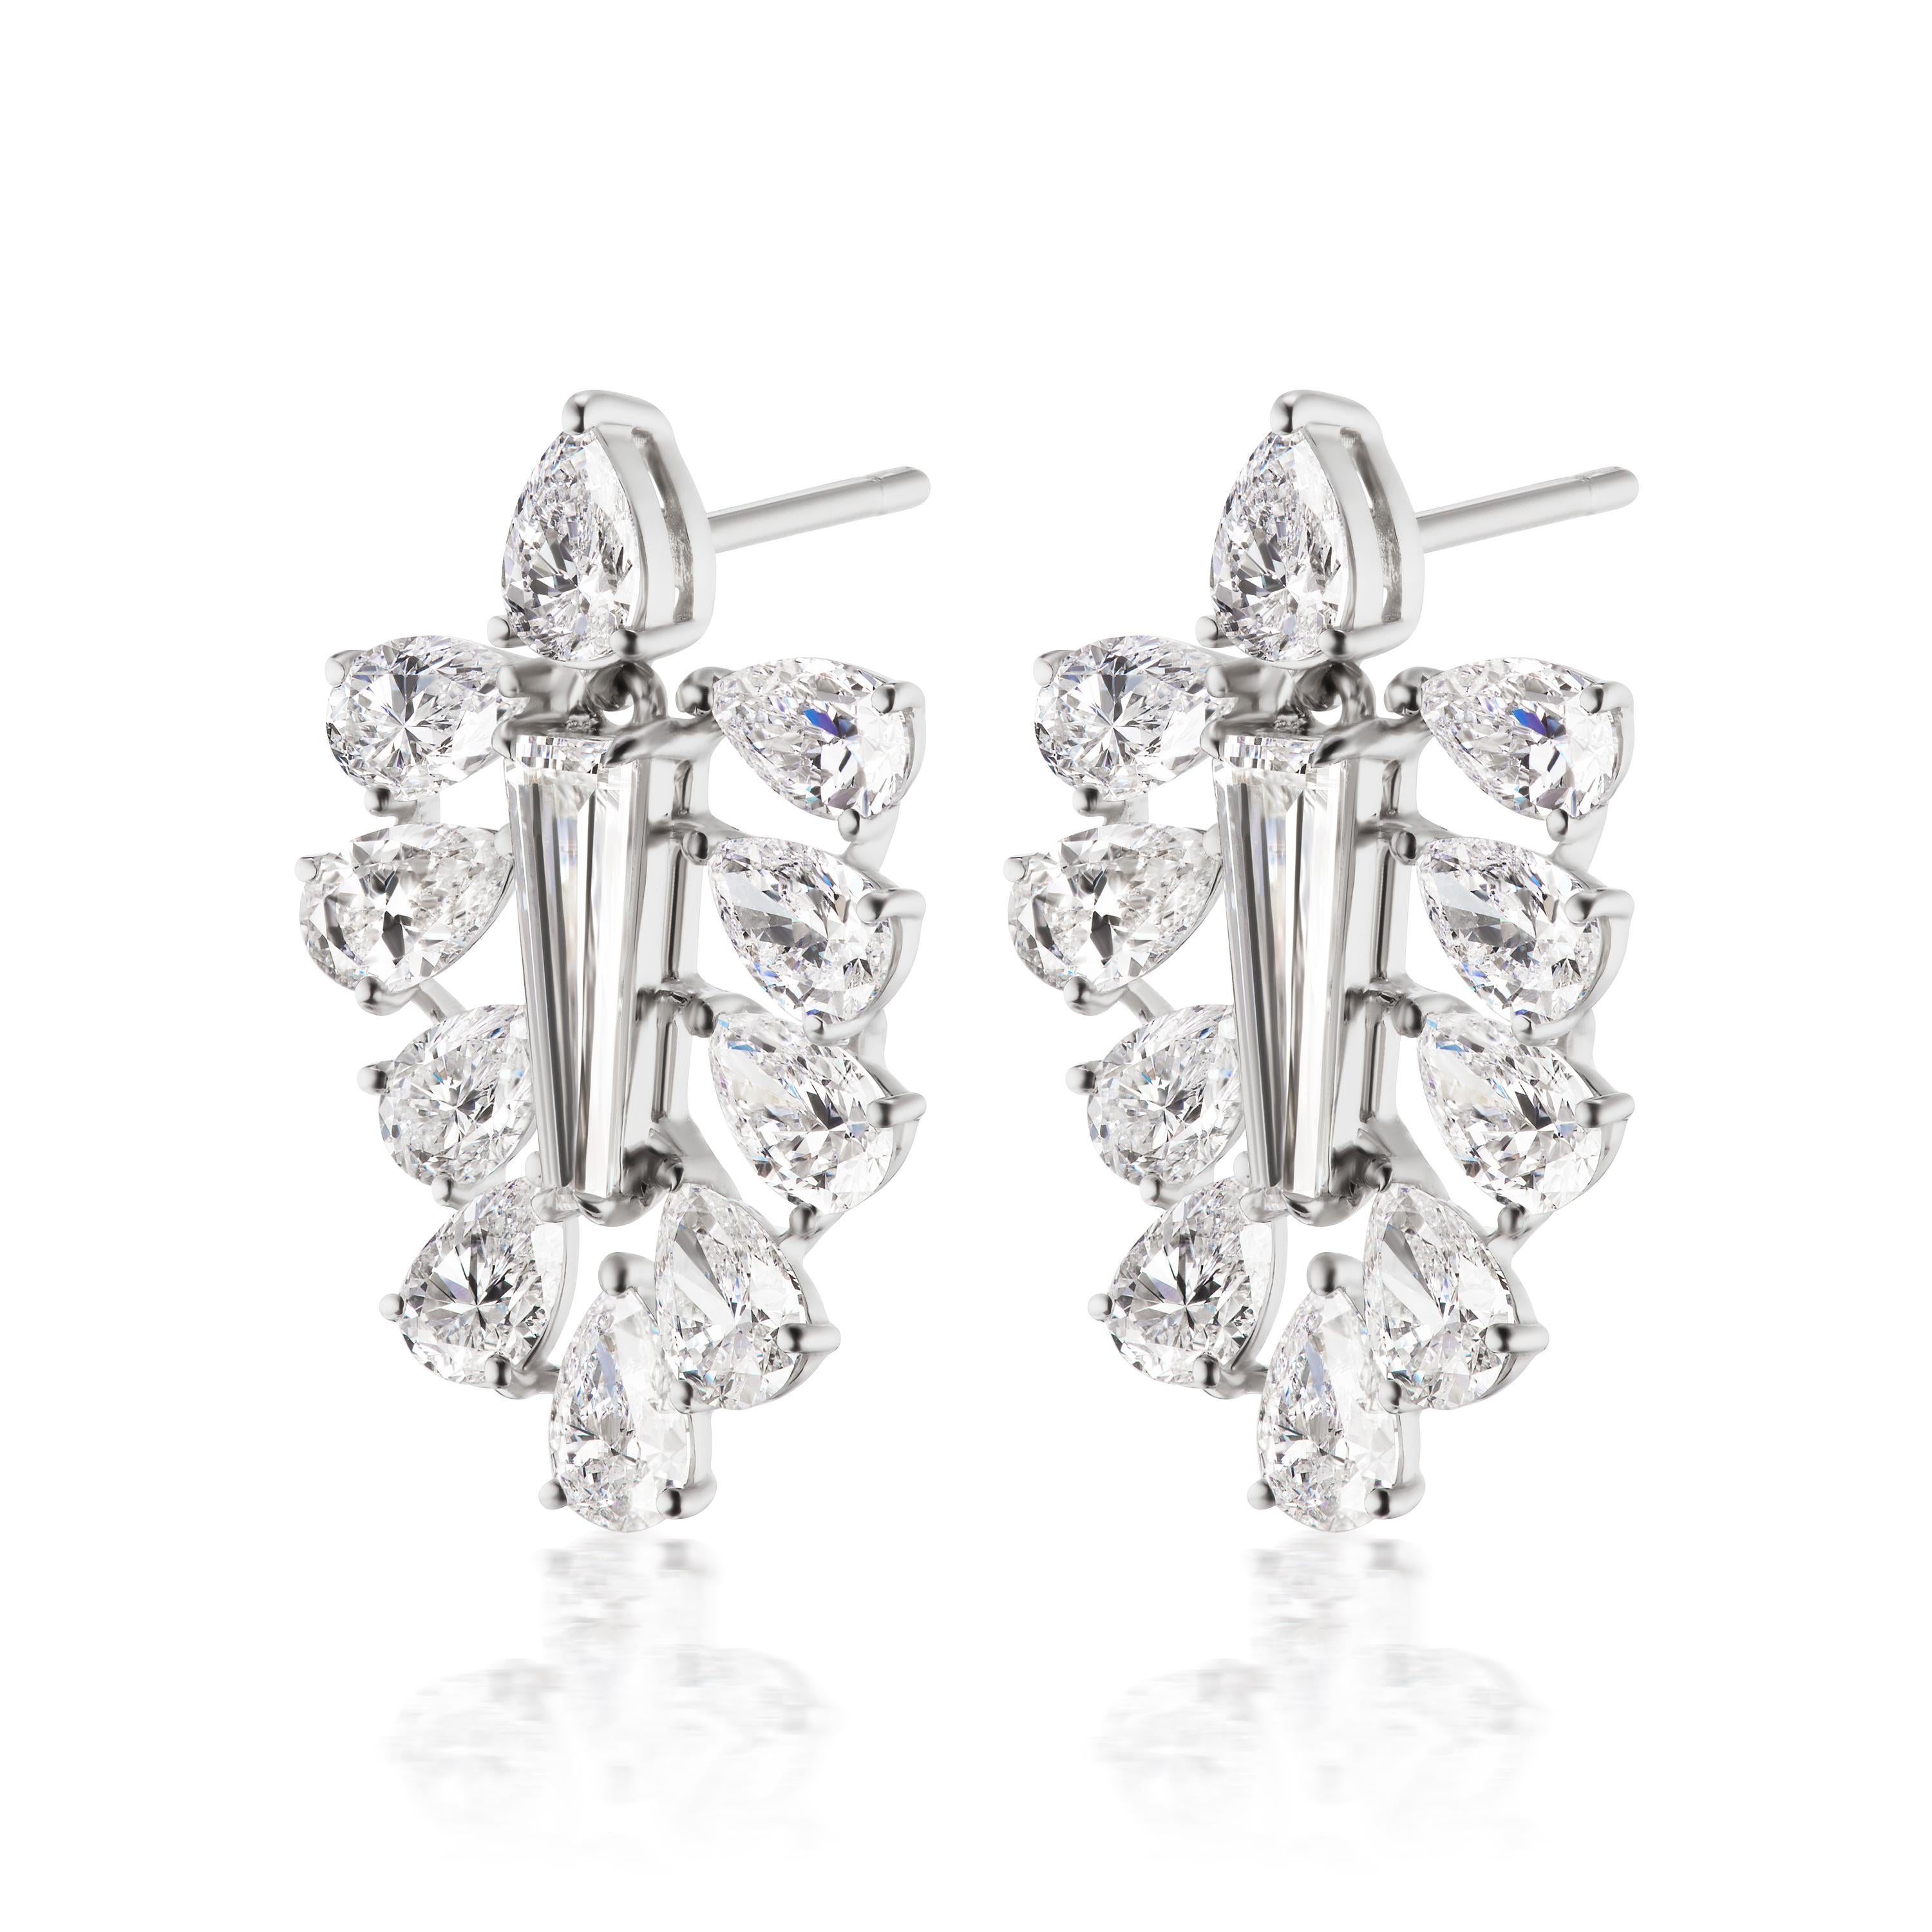 This elegant earring features 5.74 carats of pear full cut white diamonds arranged delicately to dazzle at every glance. These stud earrings are made of 18K White Gold and will be your favorite because of their simple and sophisticated design. The